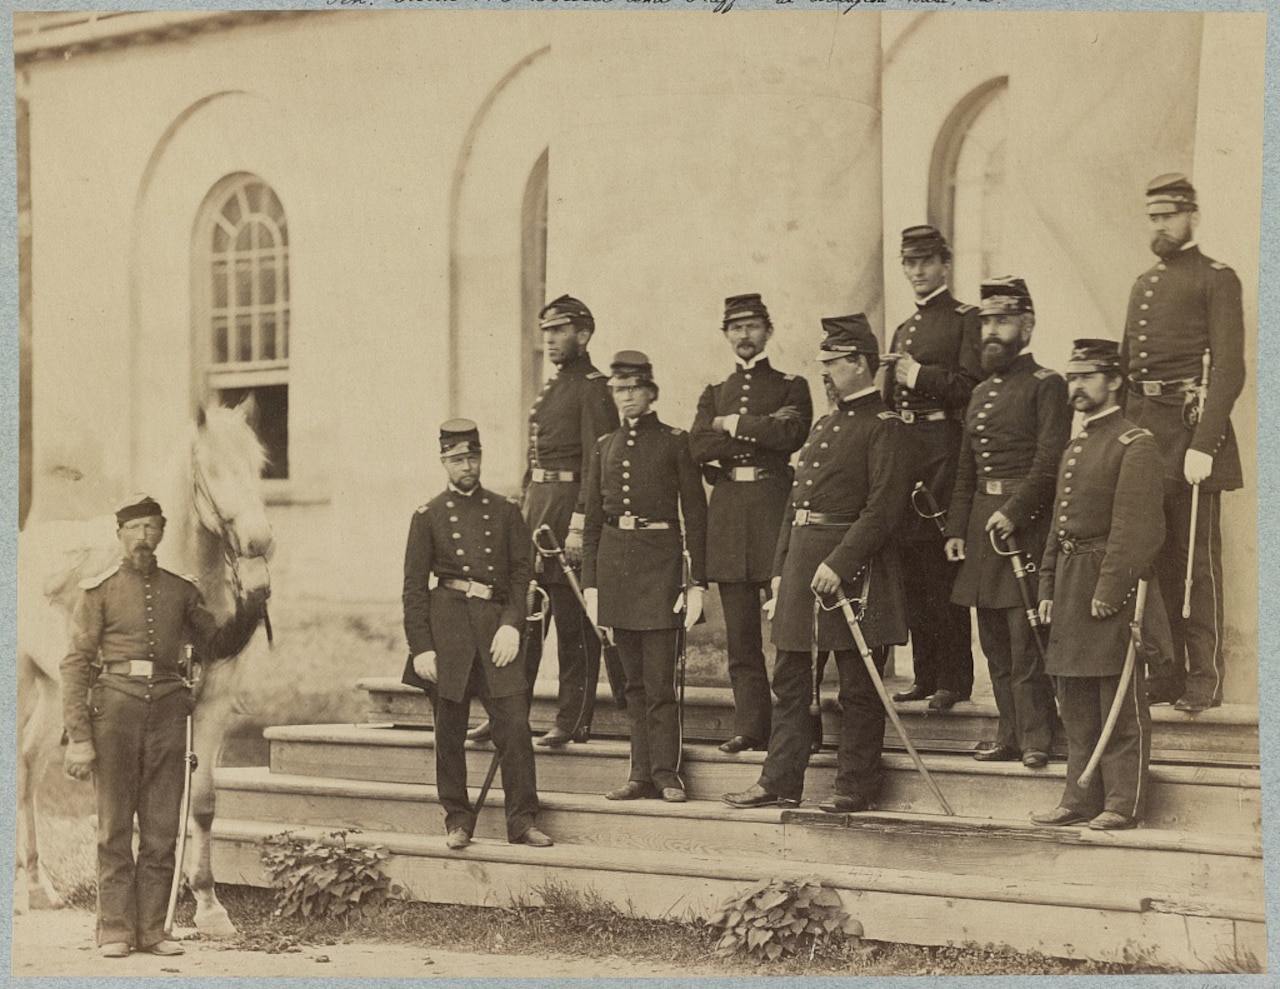 A group of soldiers stand on the steps of a large house.